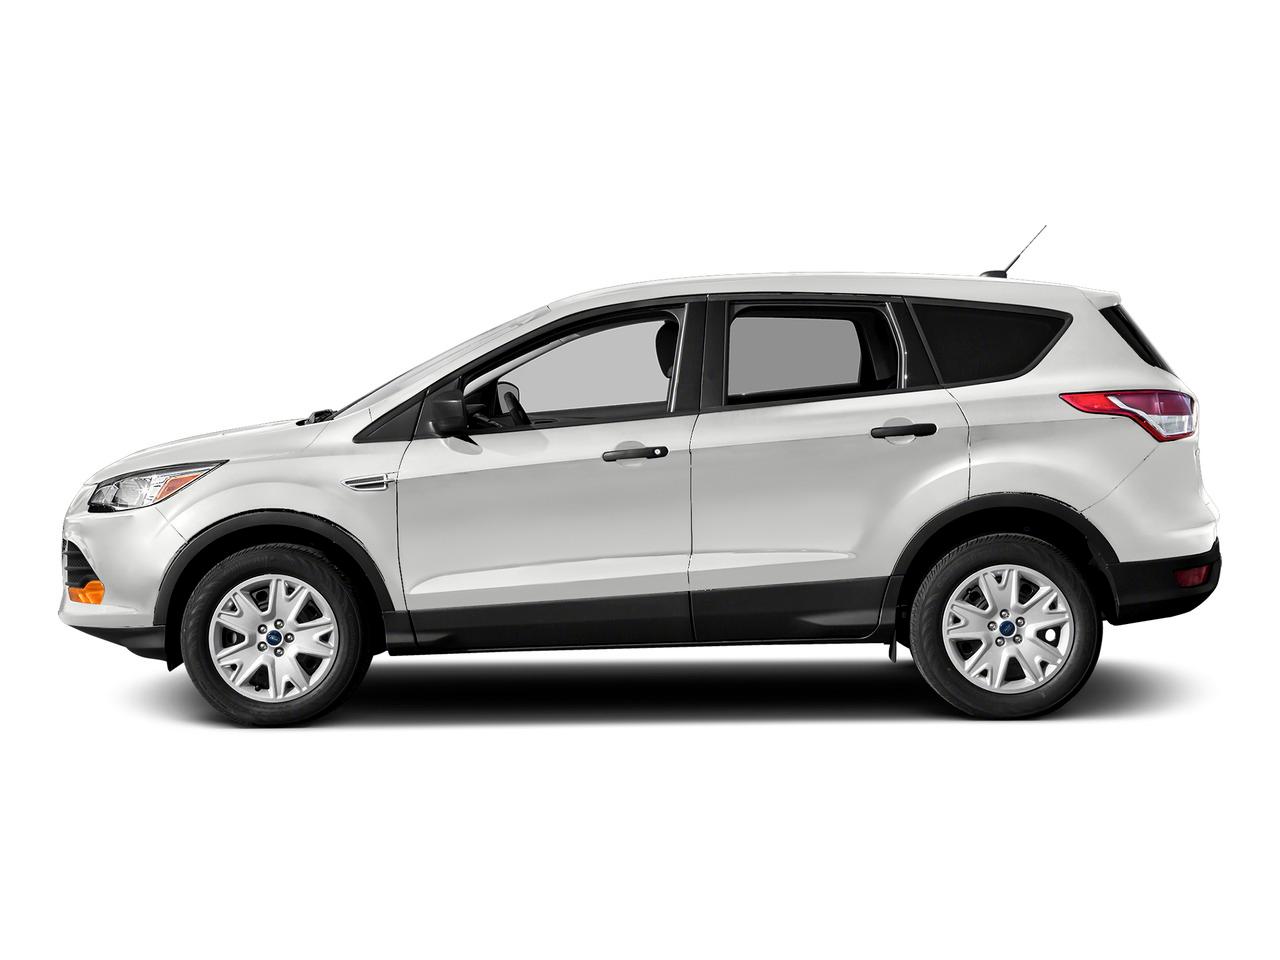 2015 Ford Escape Vehicle Photo in St. Petersburg, FL 33713